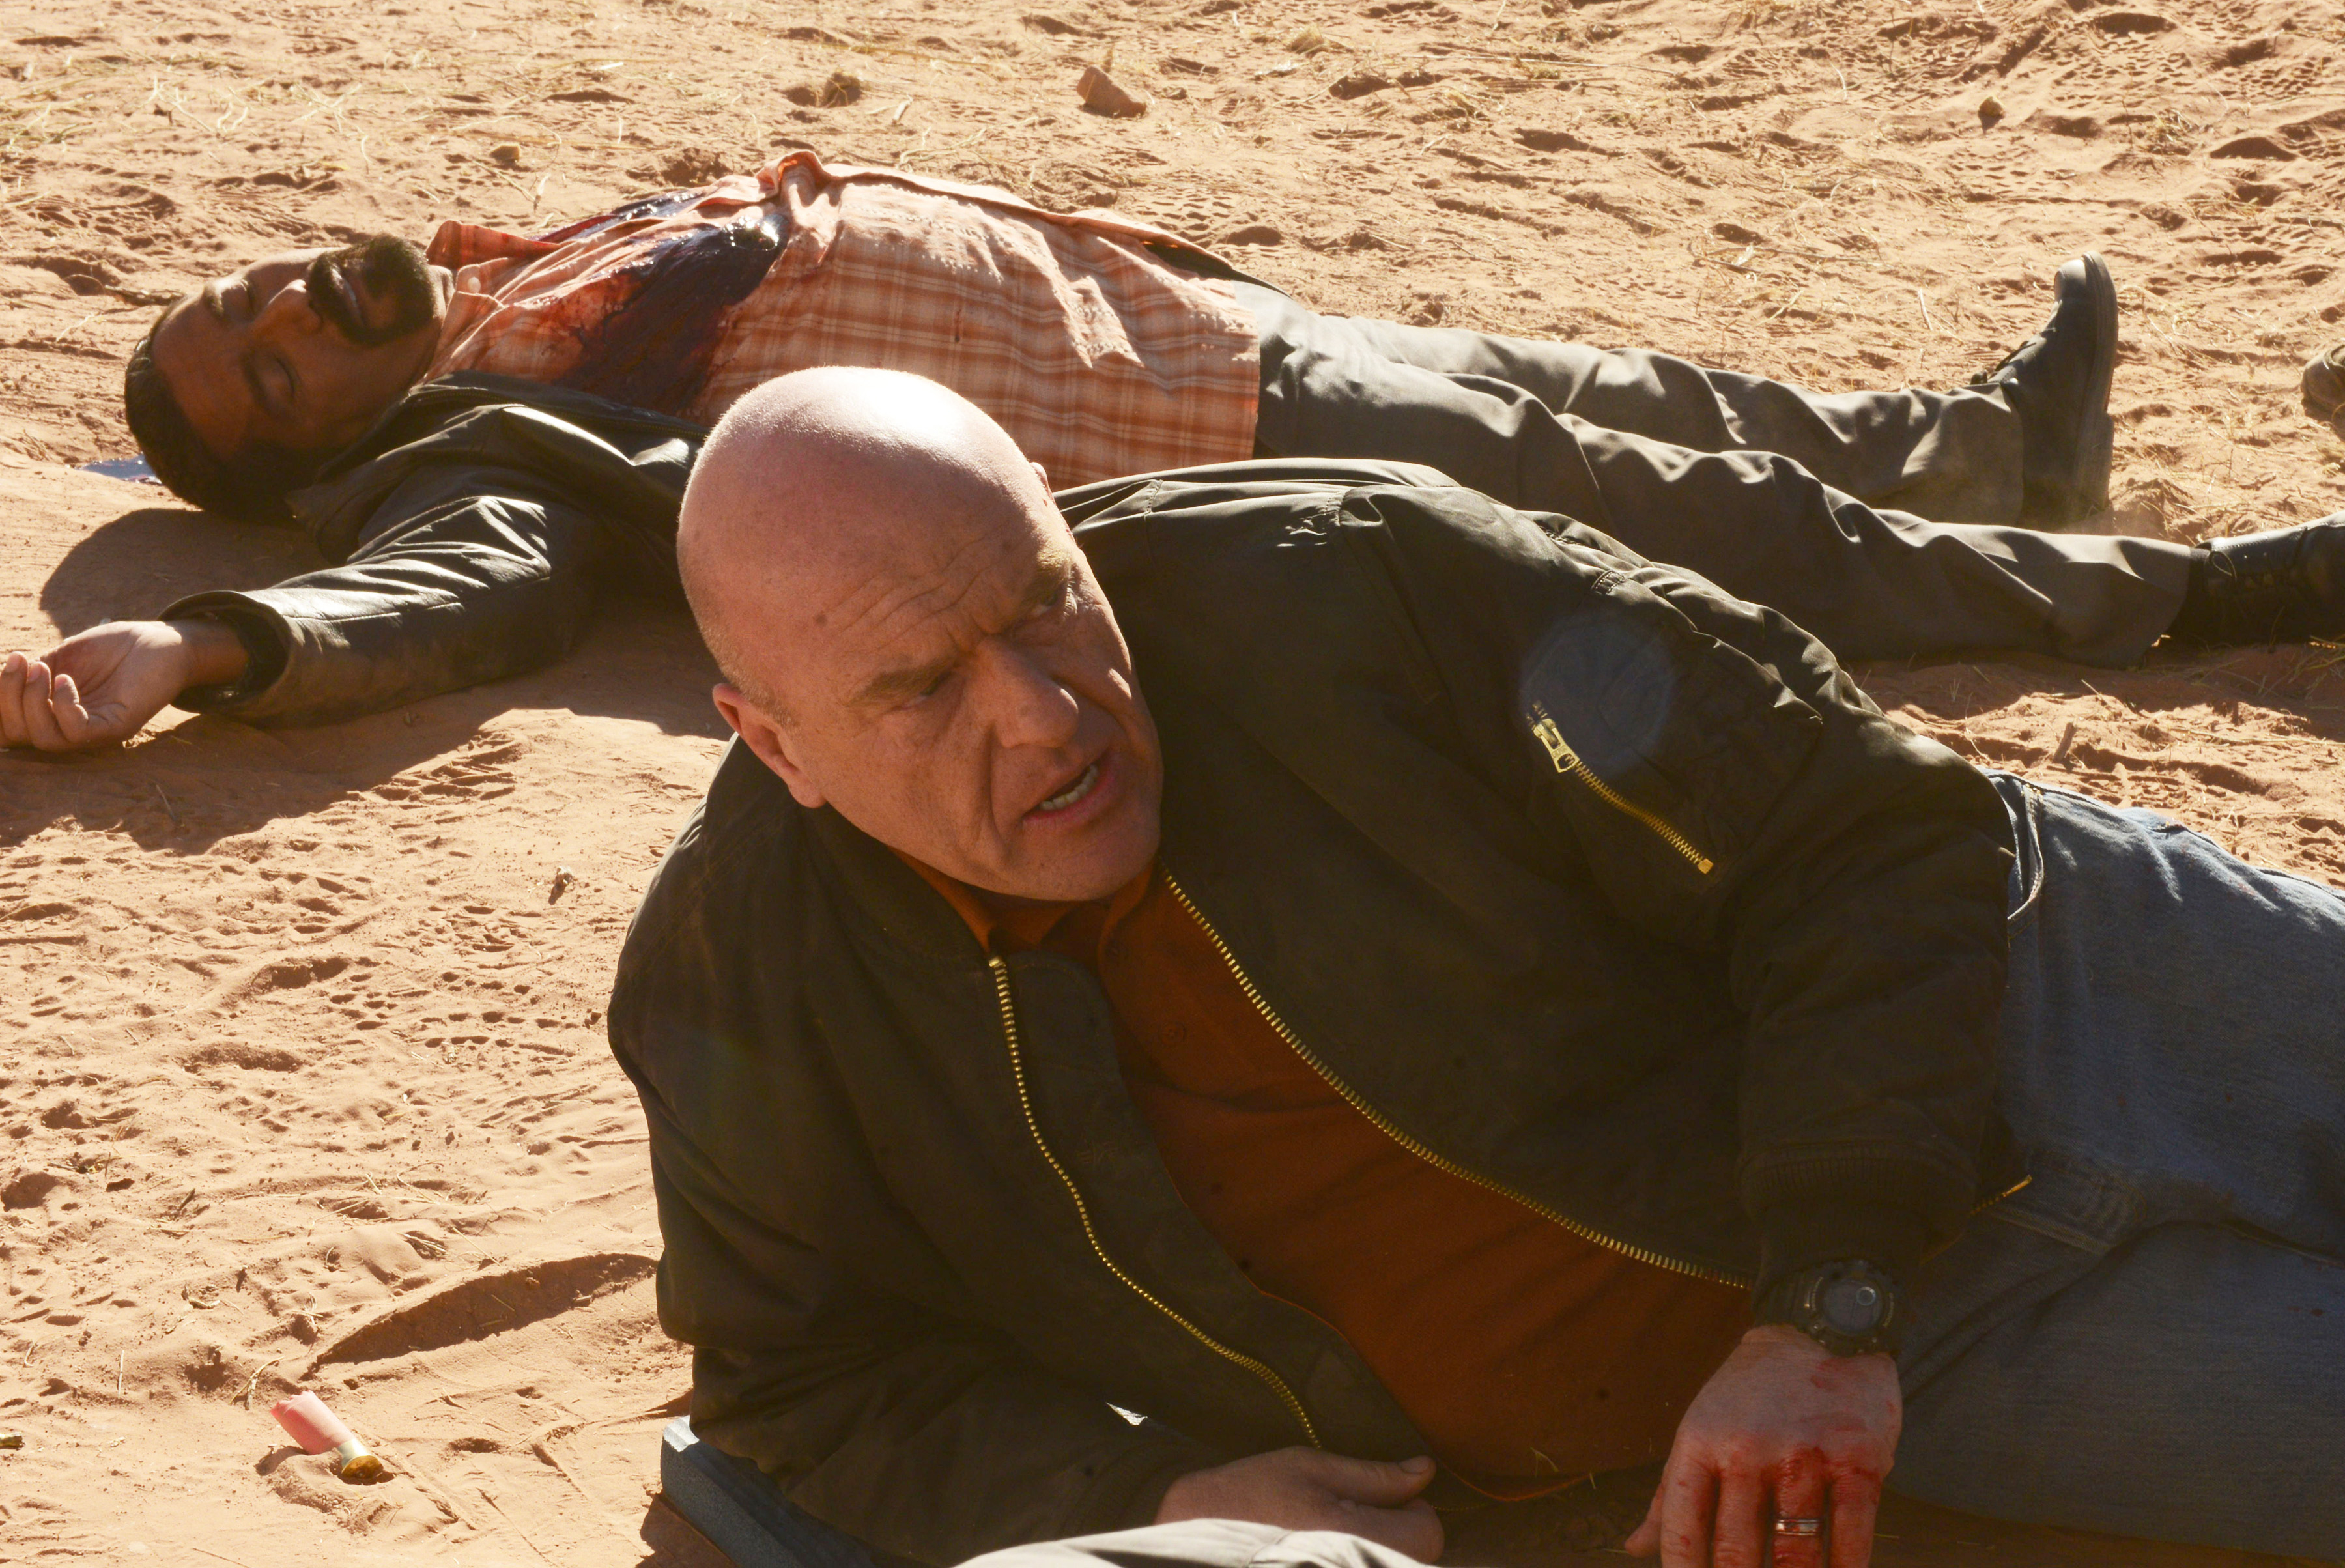 hank with blood on his hands, laying on the desert ground